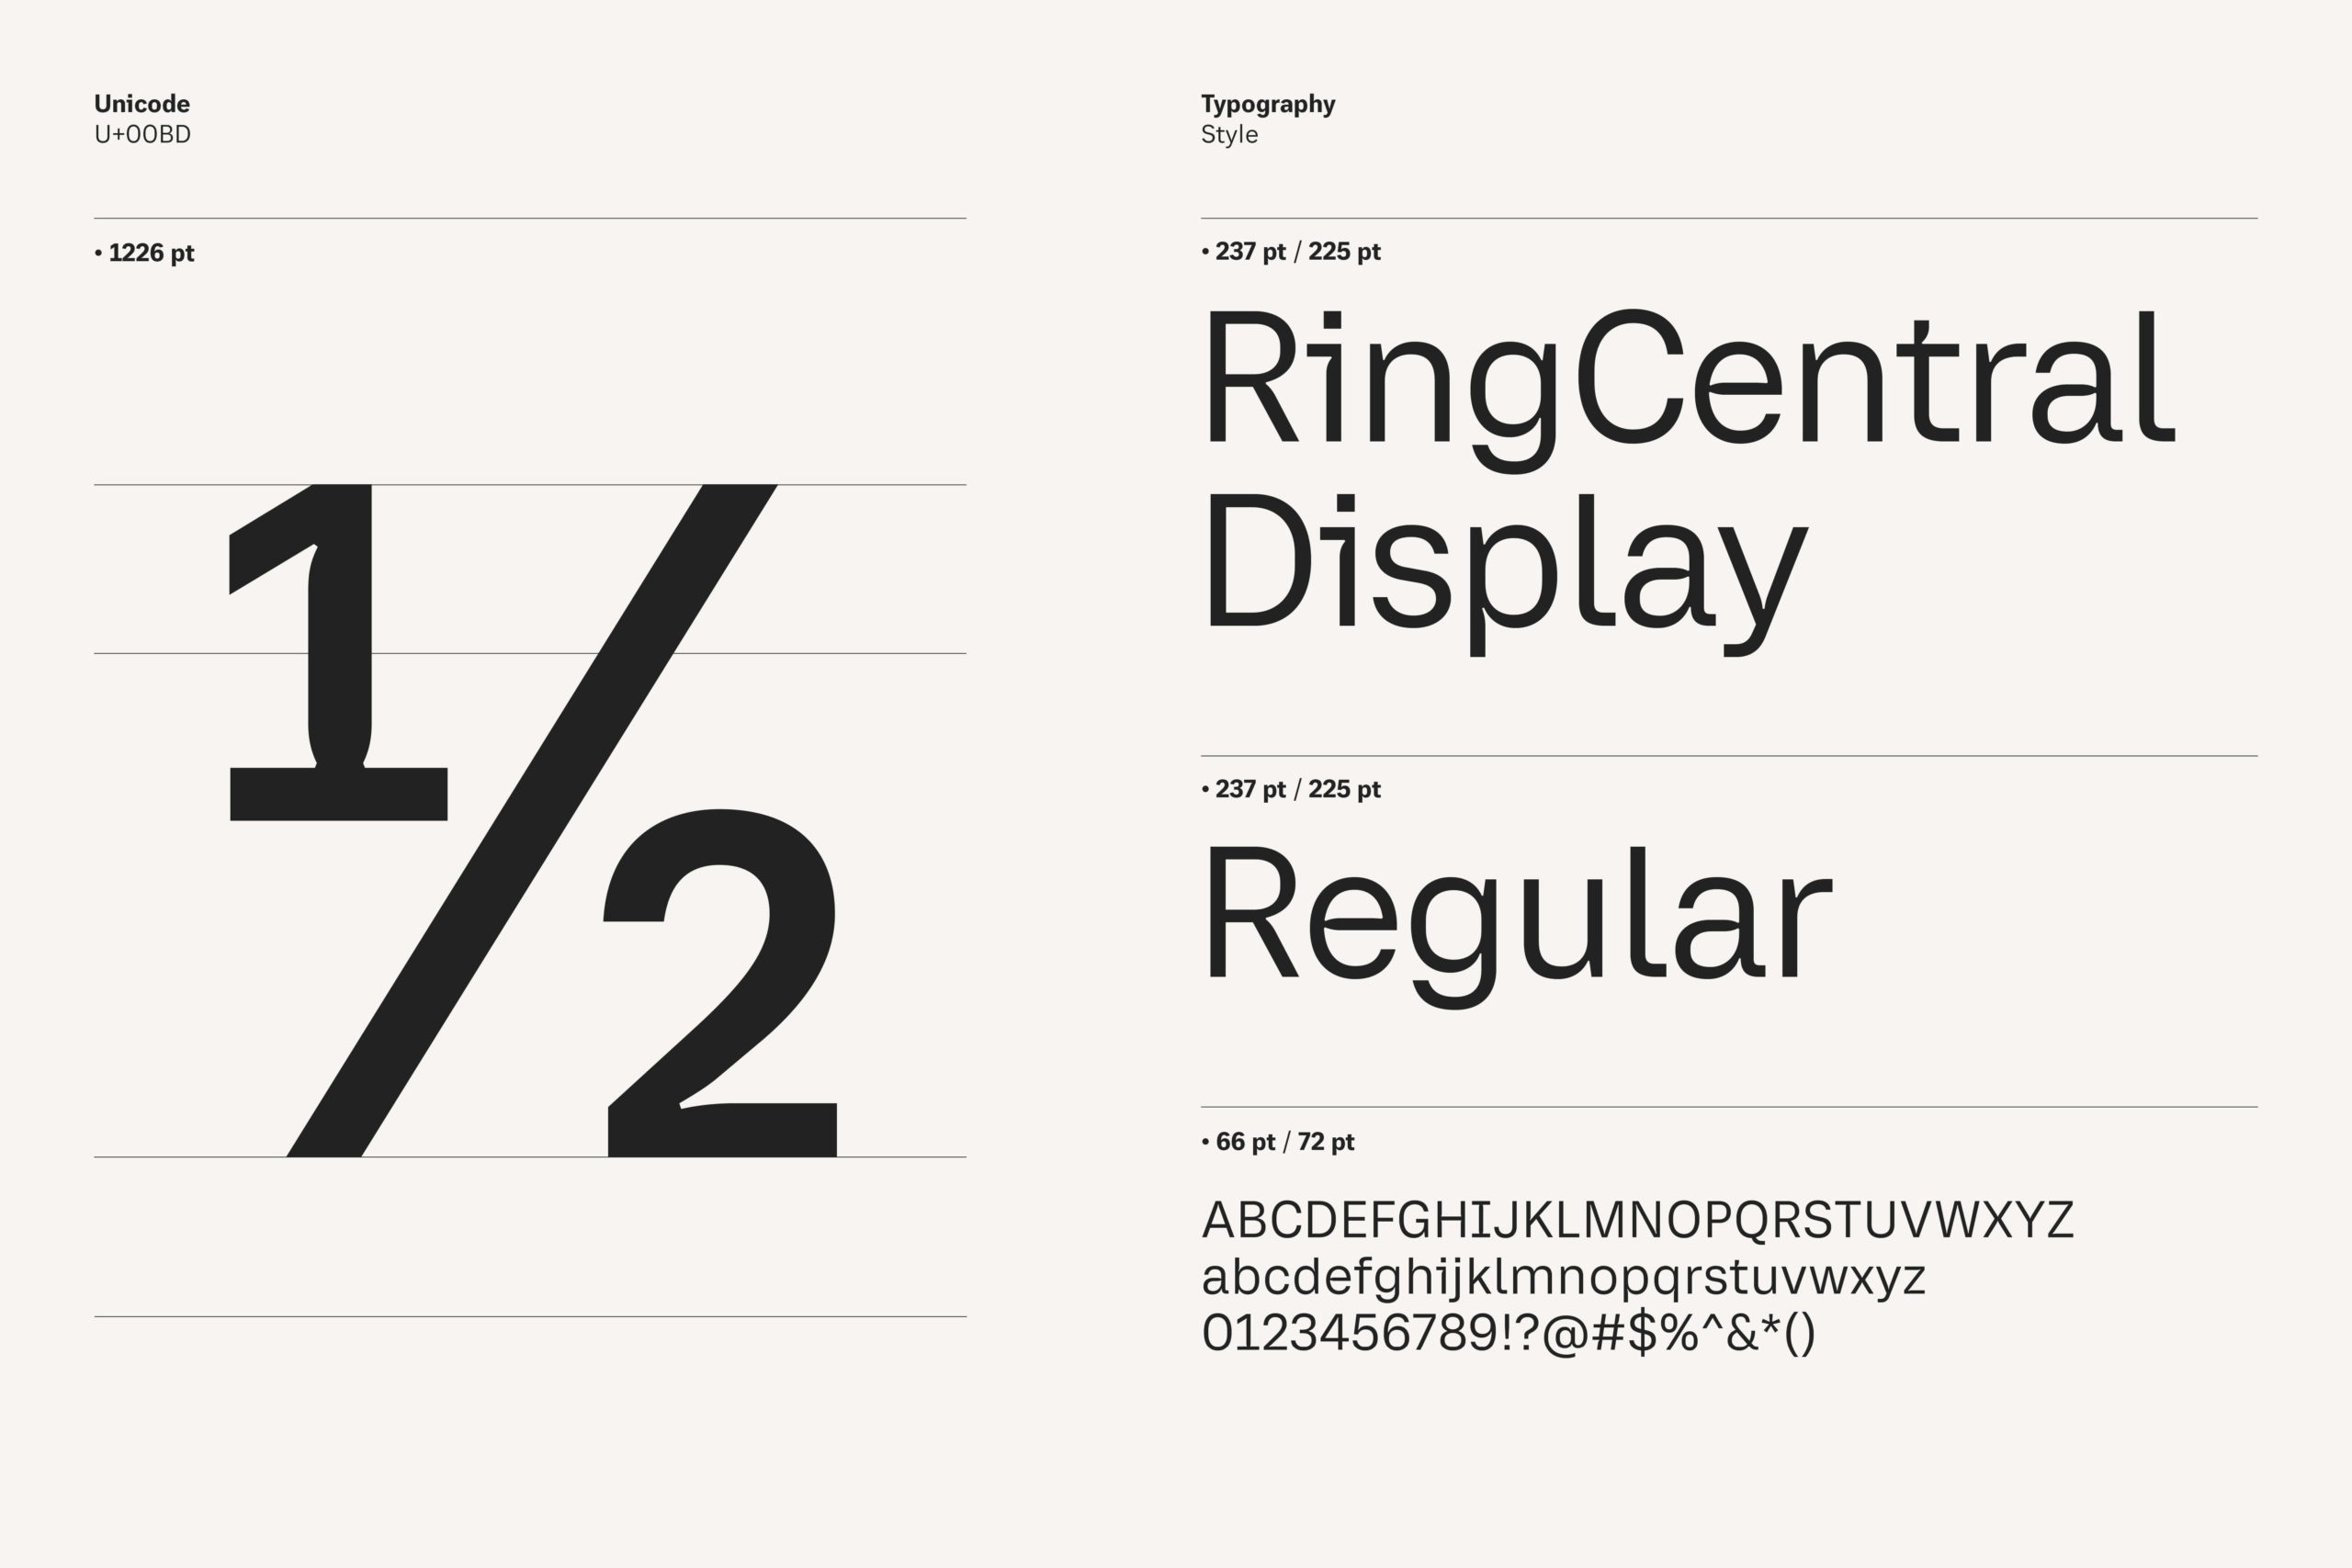 RingCentral Display_Typeface_09142219